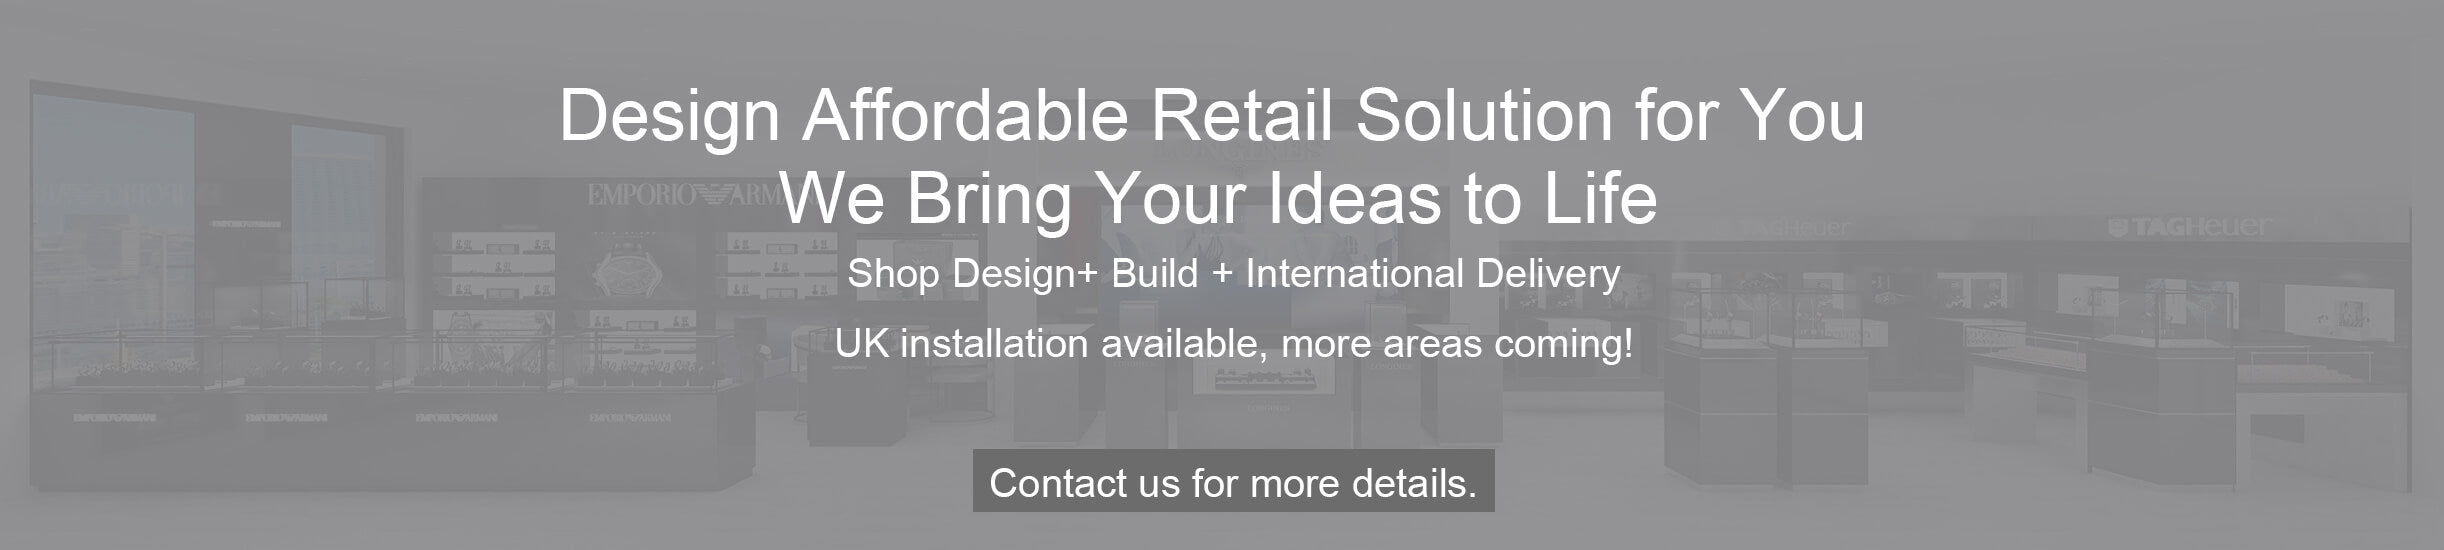 design affordable retail solution for you we bring your ideas to life